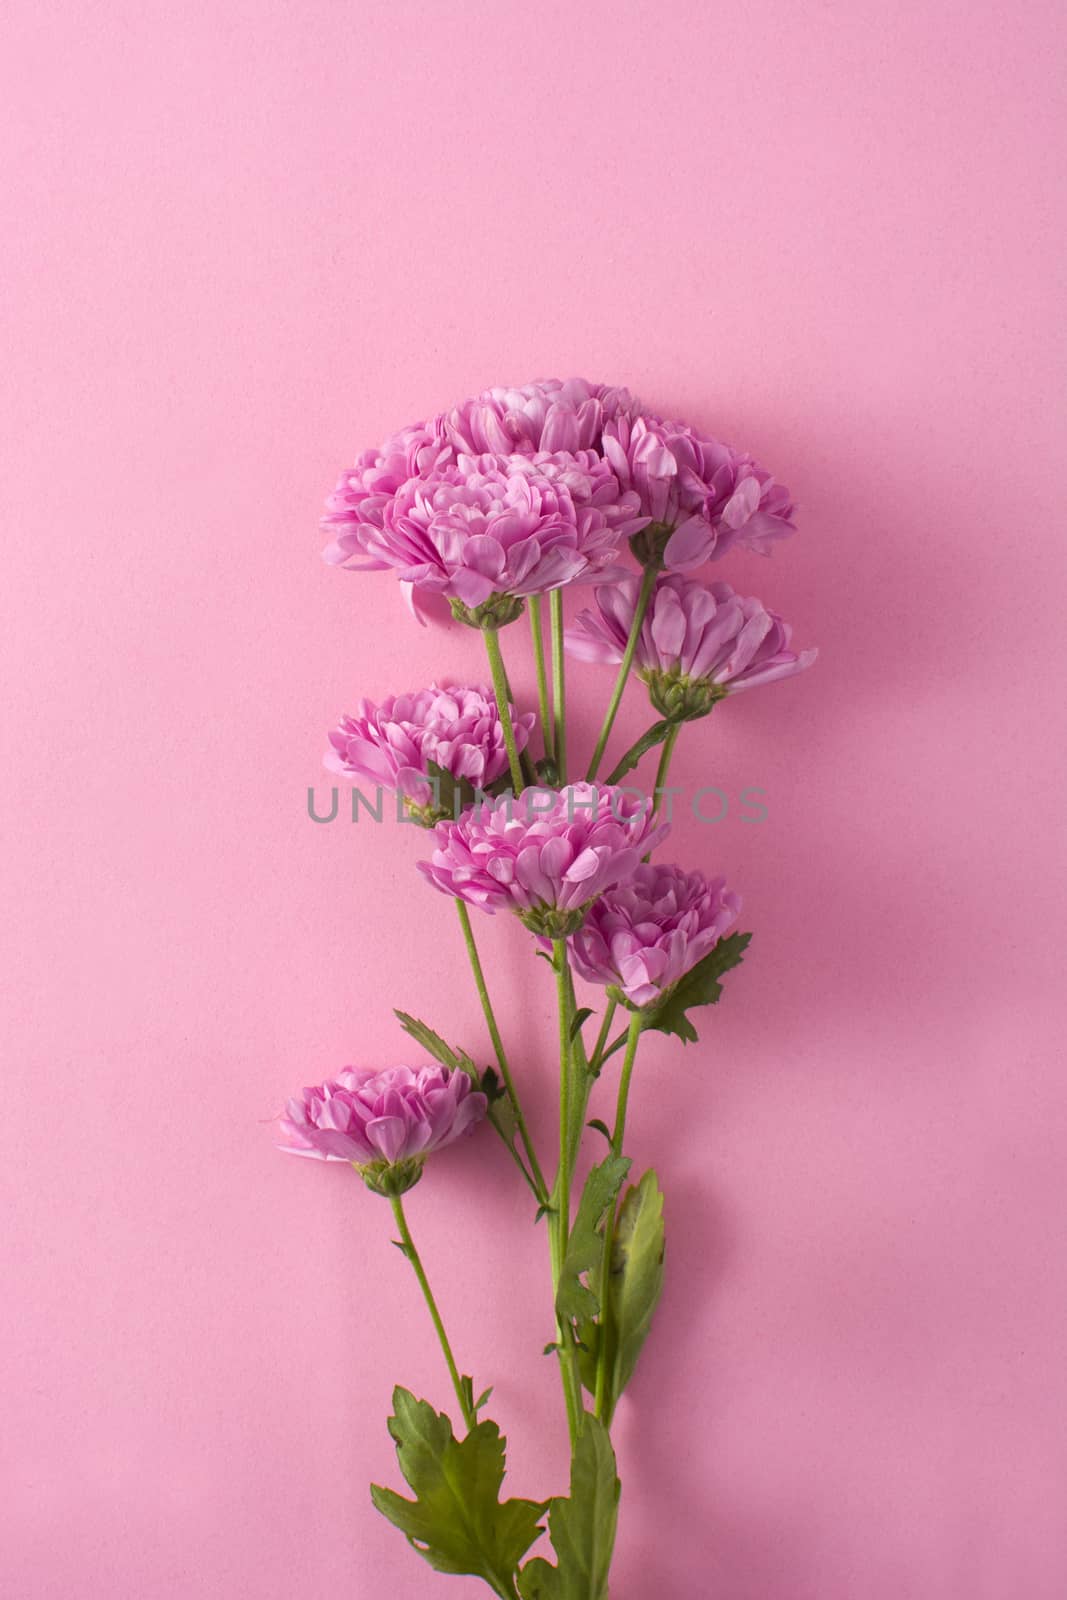 Purple chrysanthemum and petals on pink background